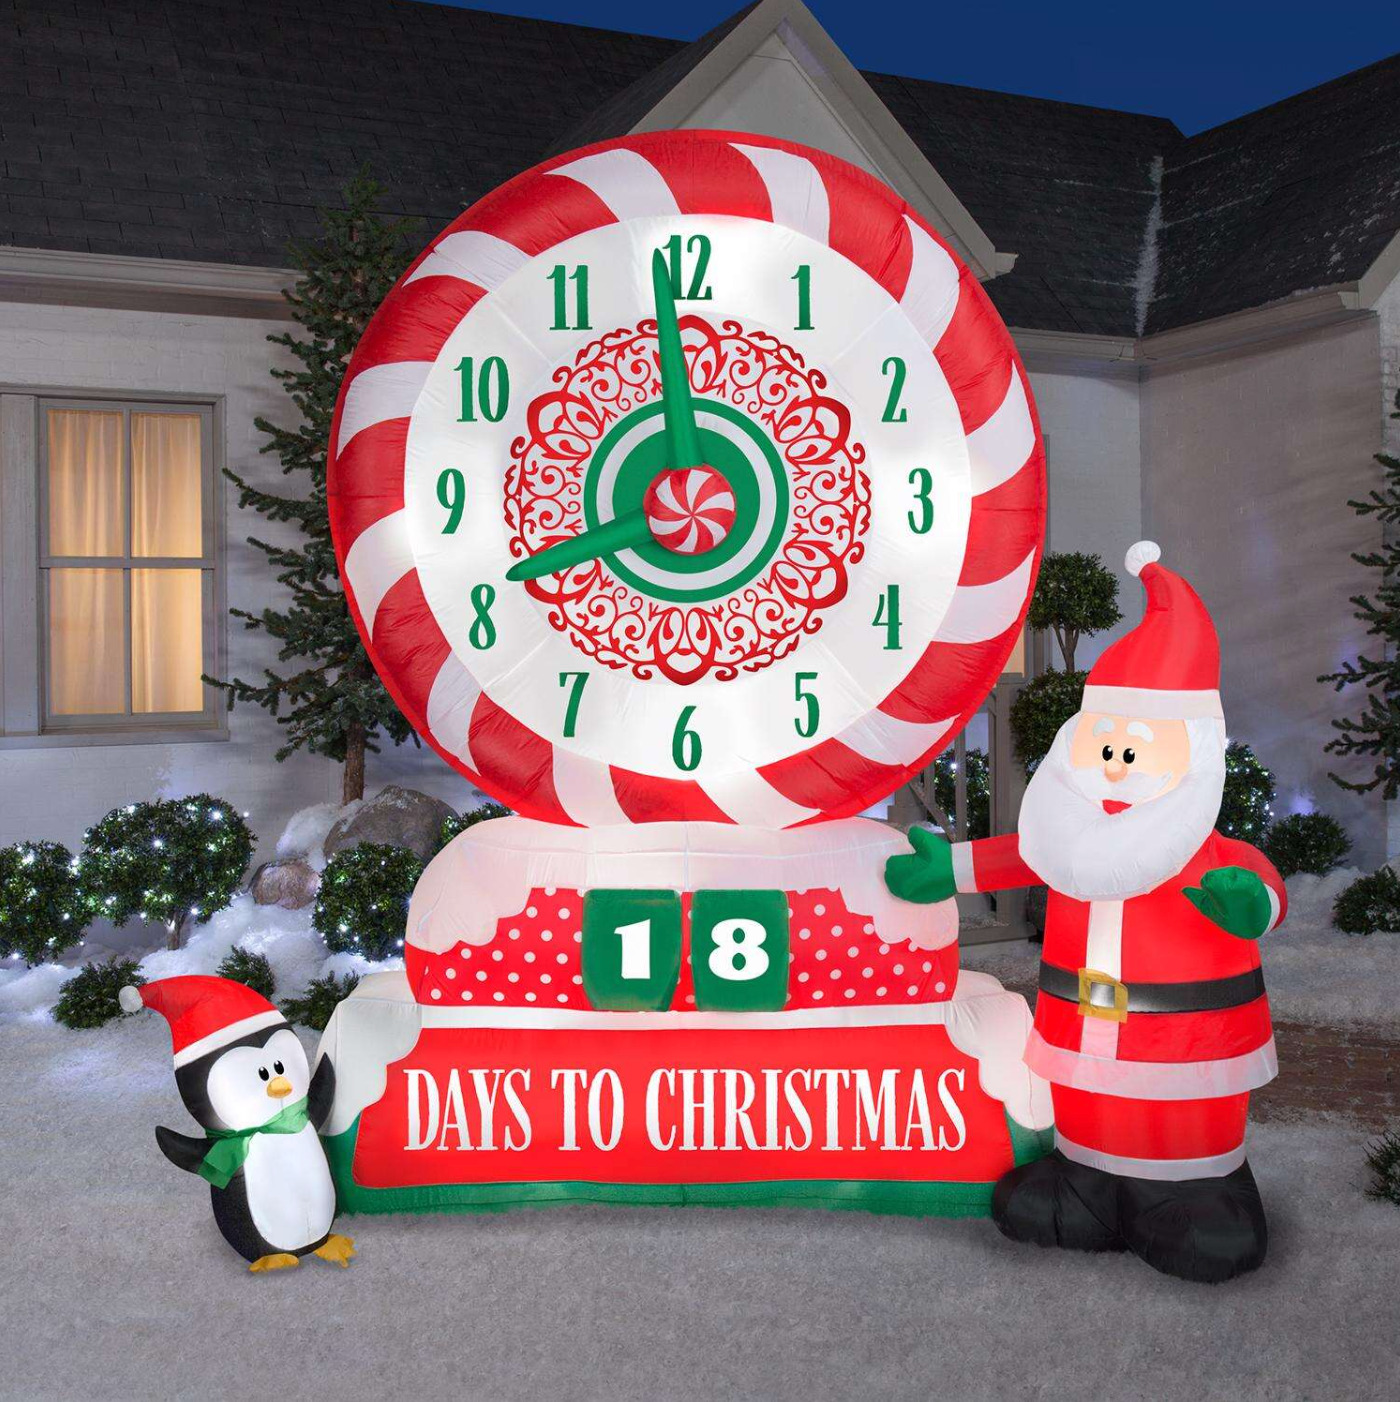 9' ANIMATED SPINNING COUNTDOWN CLOCK TO CHRISTMAS Airblown LED Yard Inflatable